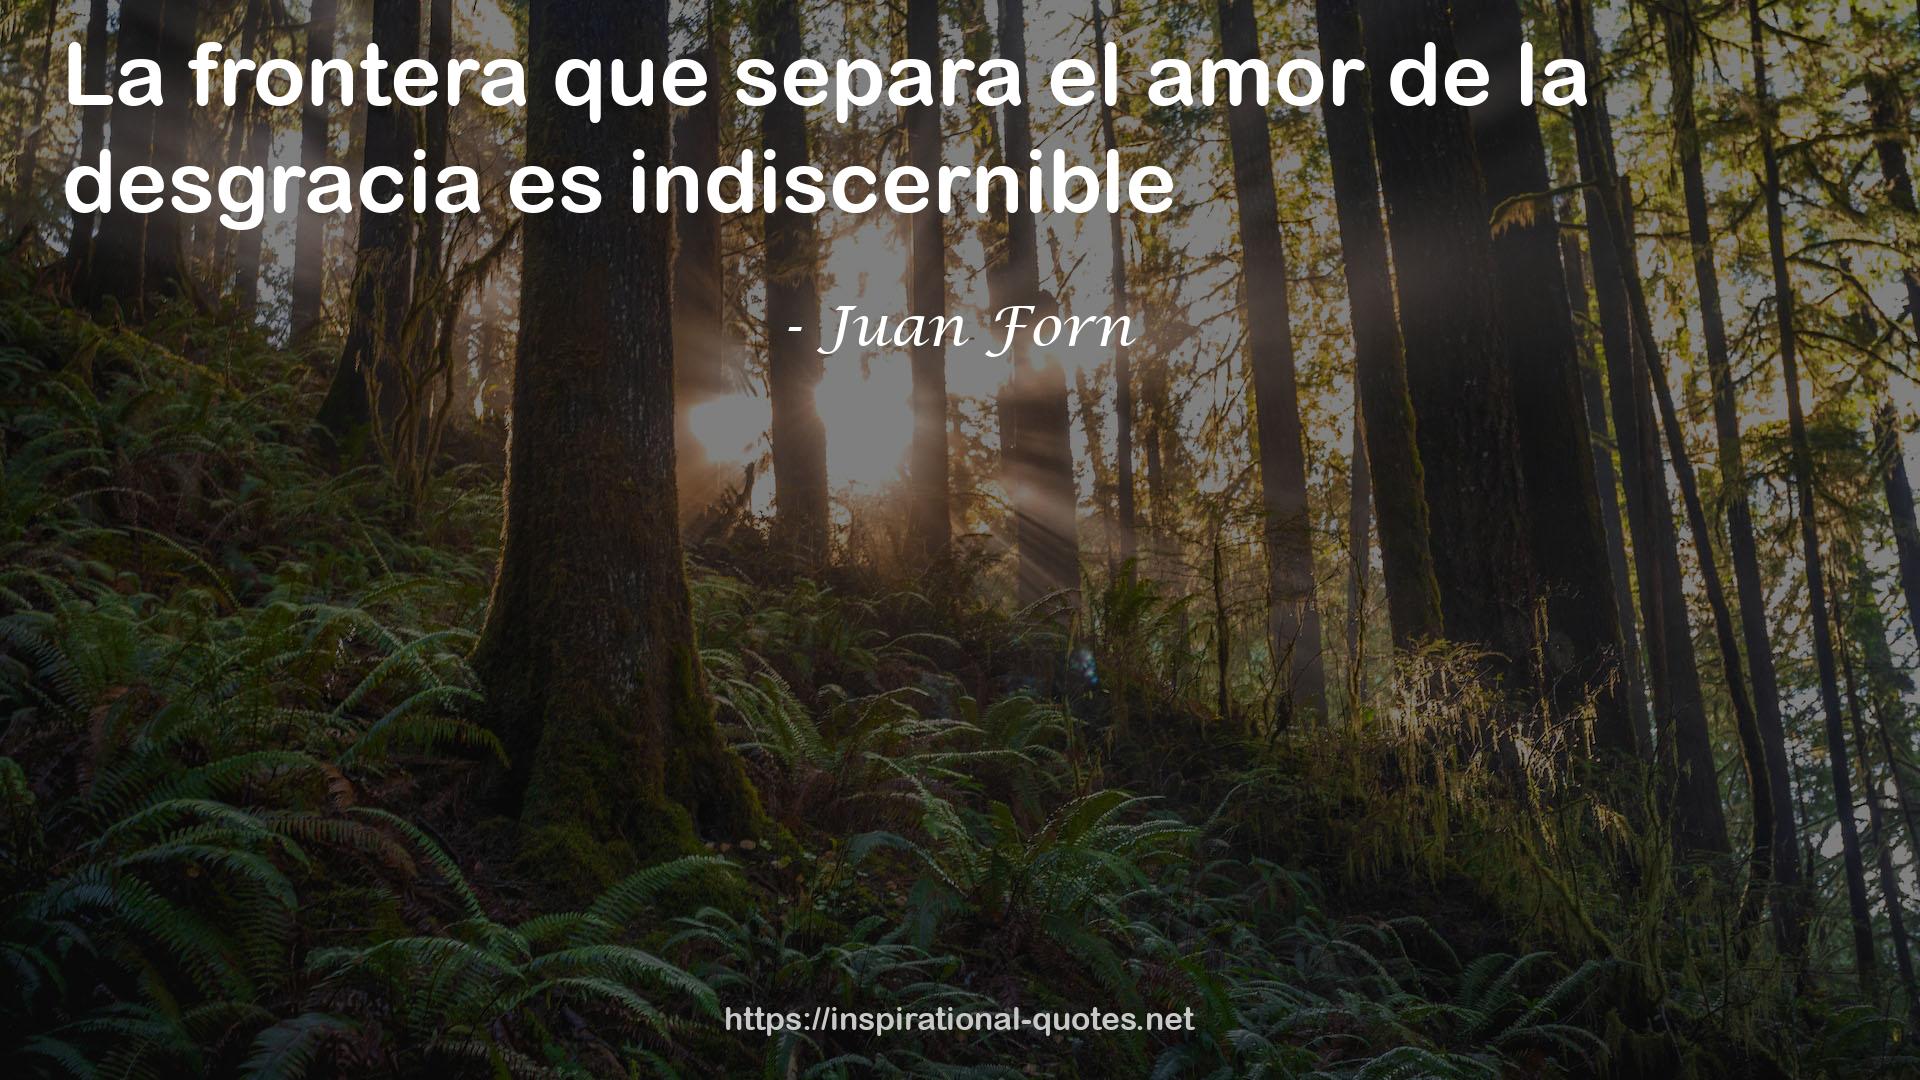 Juan Forn QUOTES